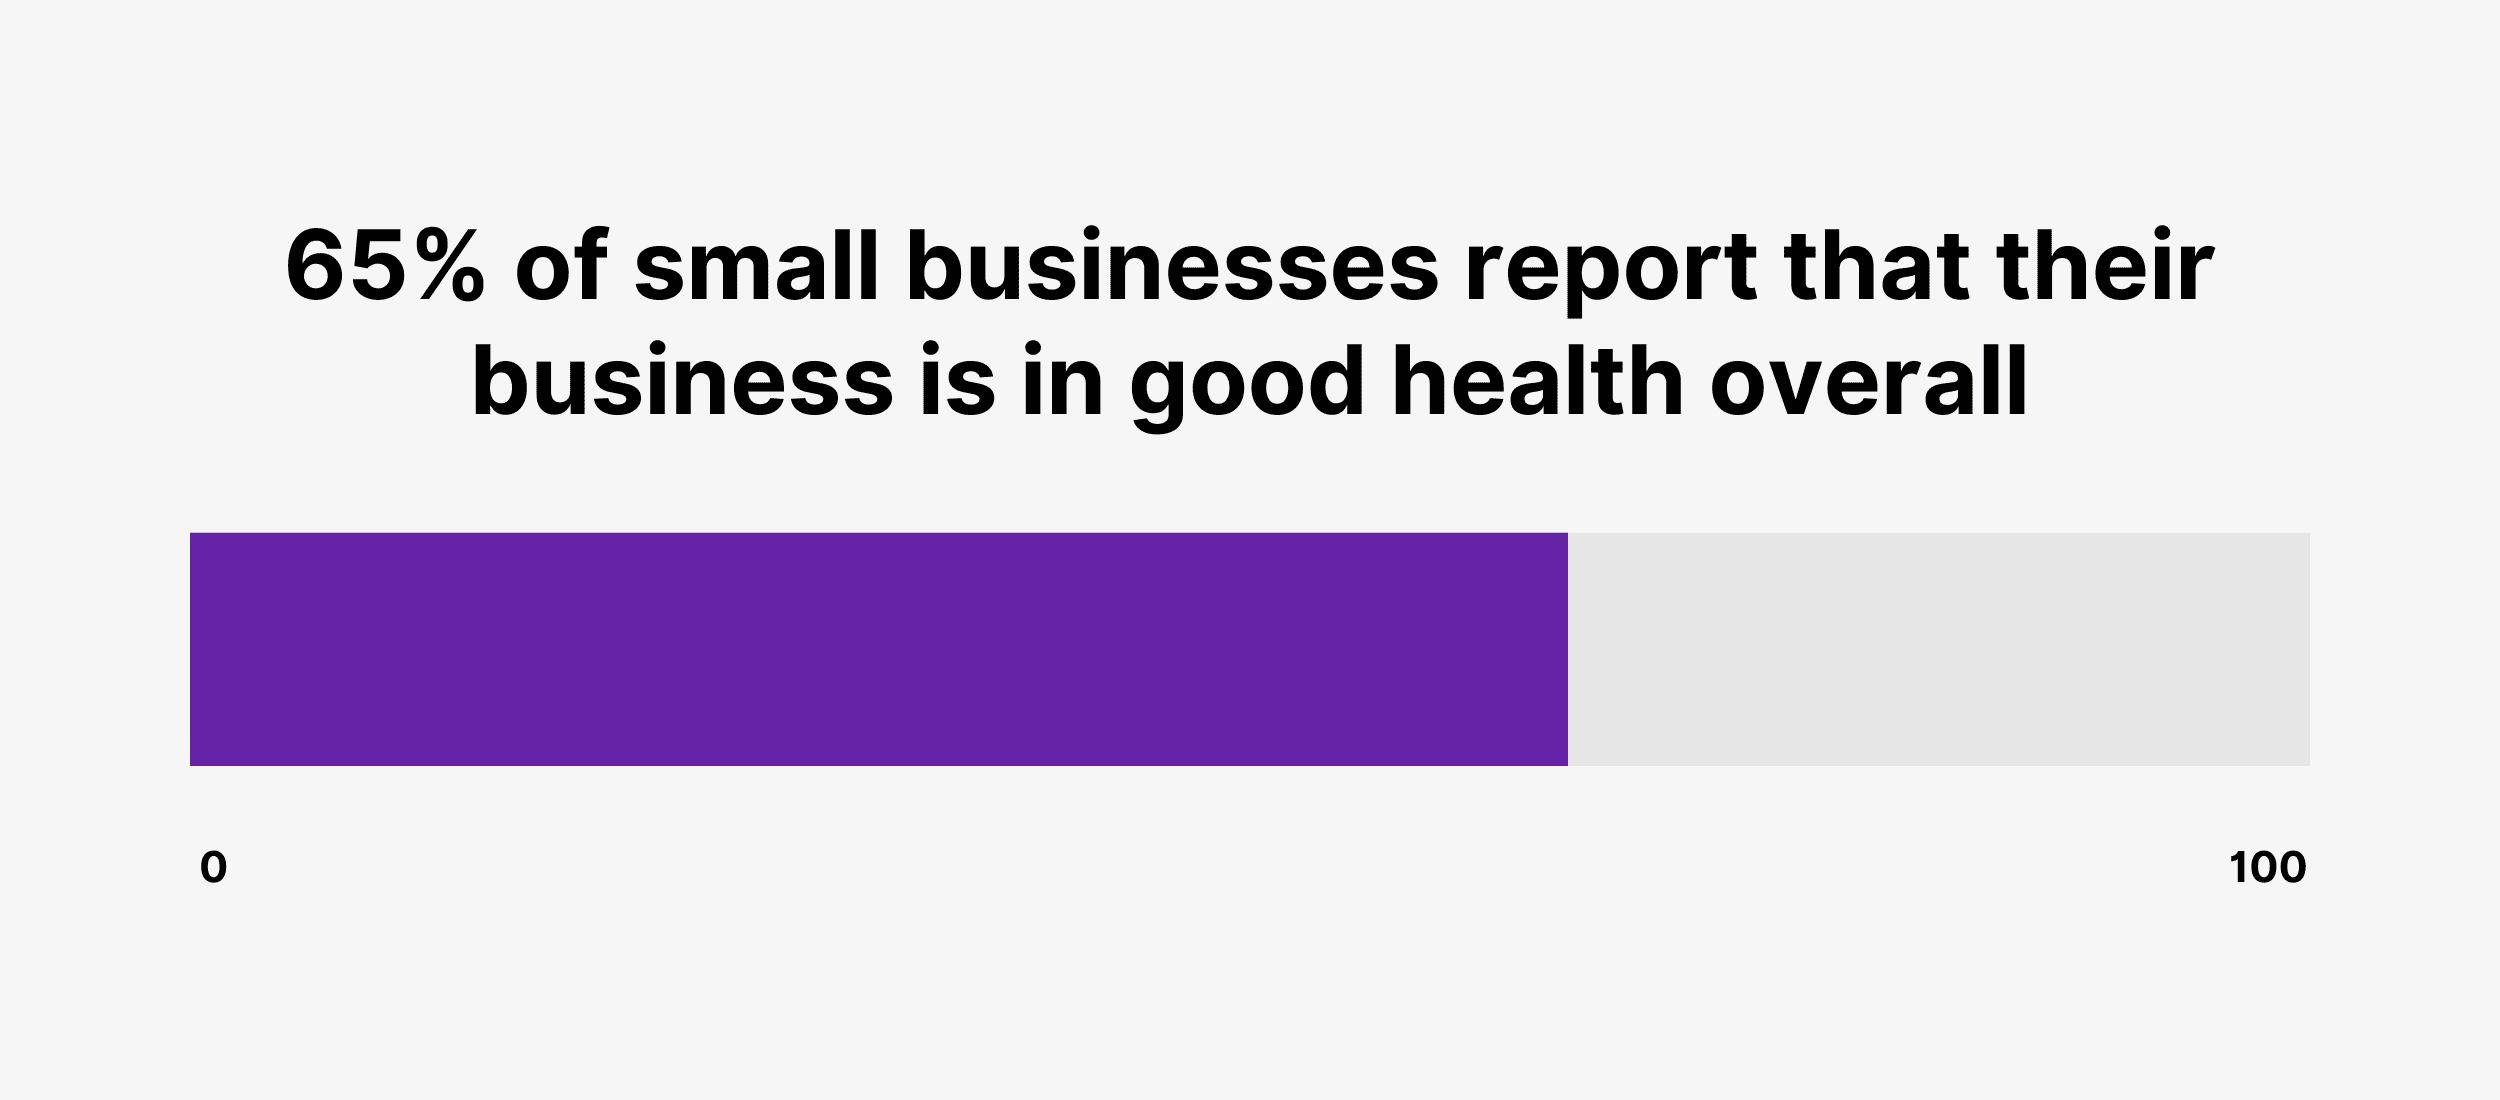 65% of small businesses report that their business is in good health overall